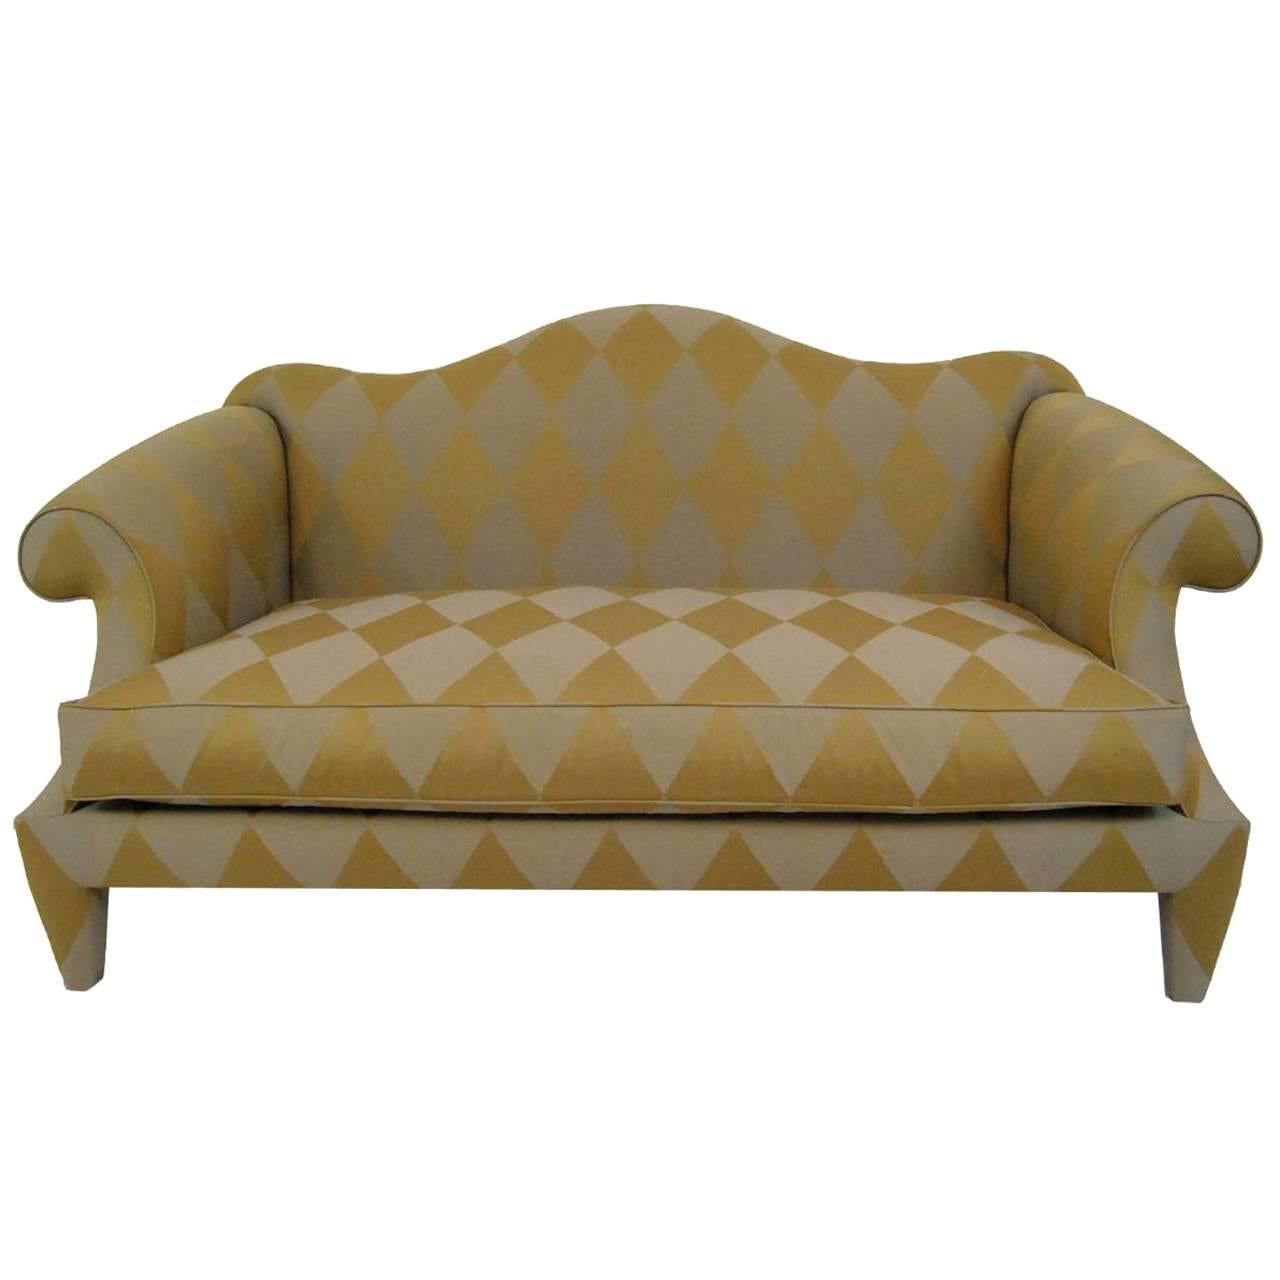 20th Century Camelback Settee Sofa by Donghia